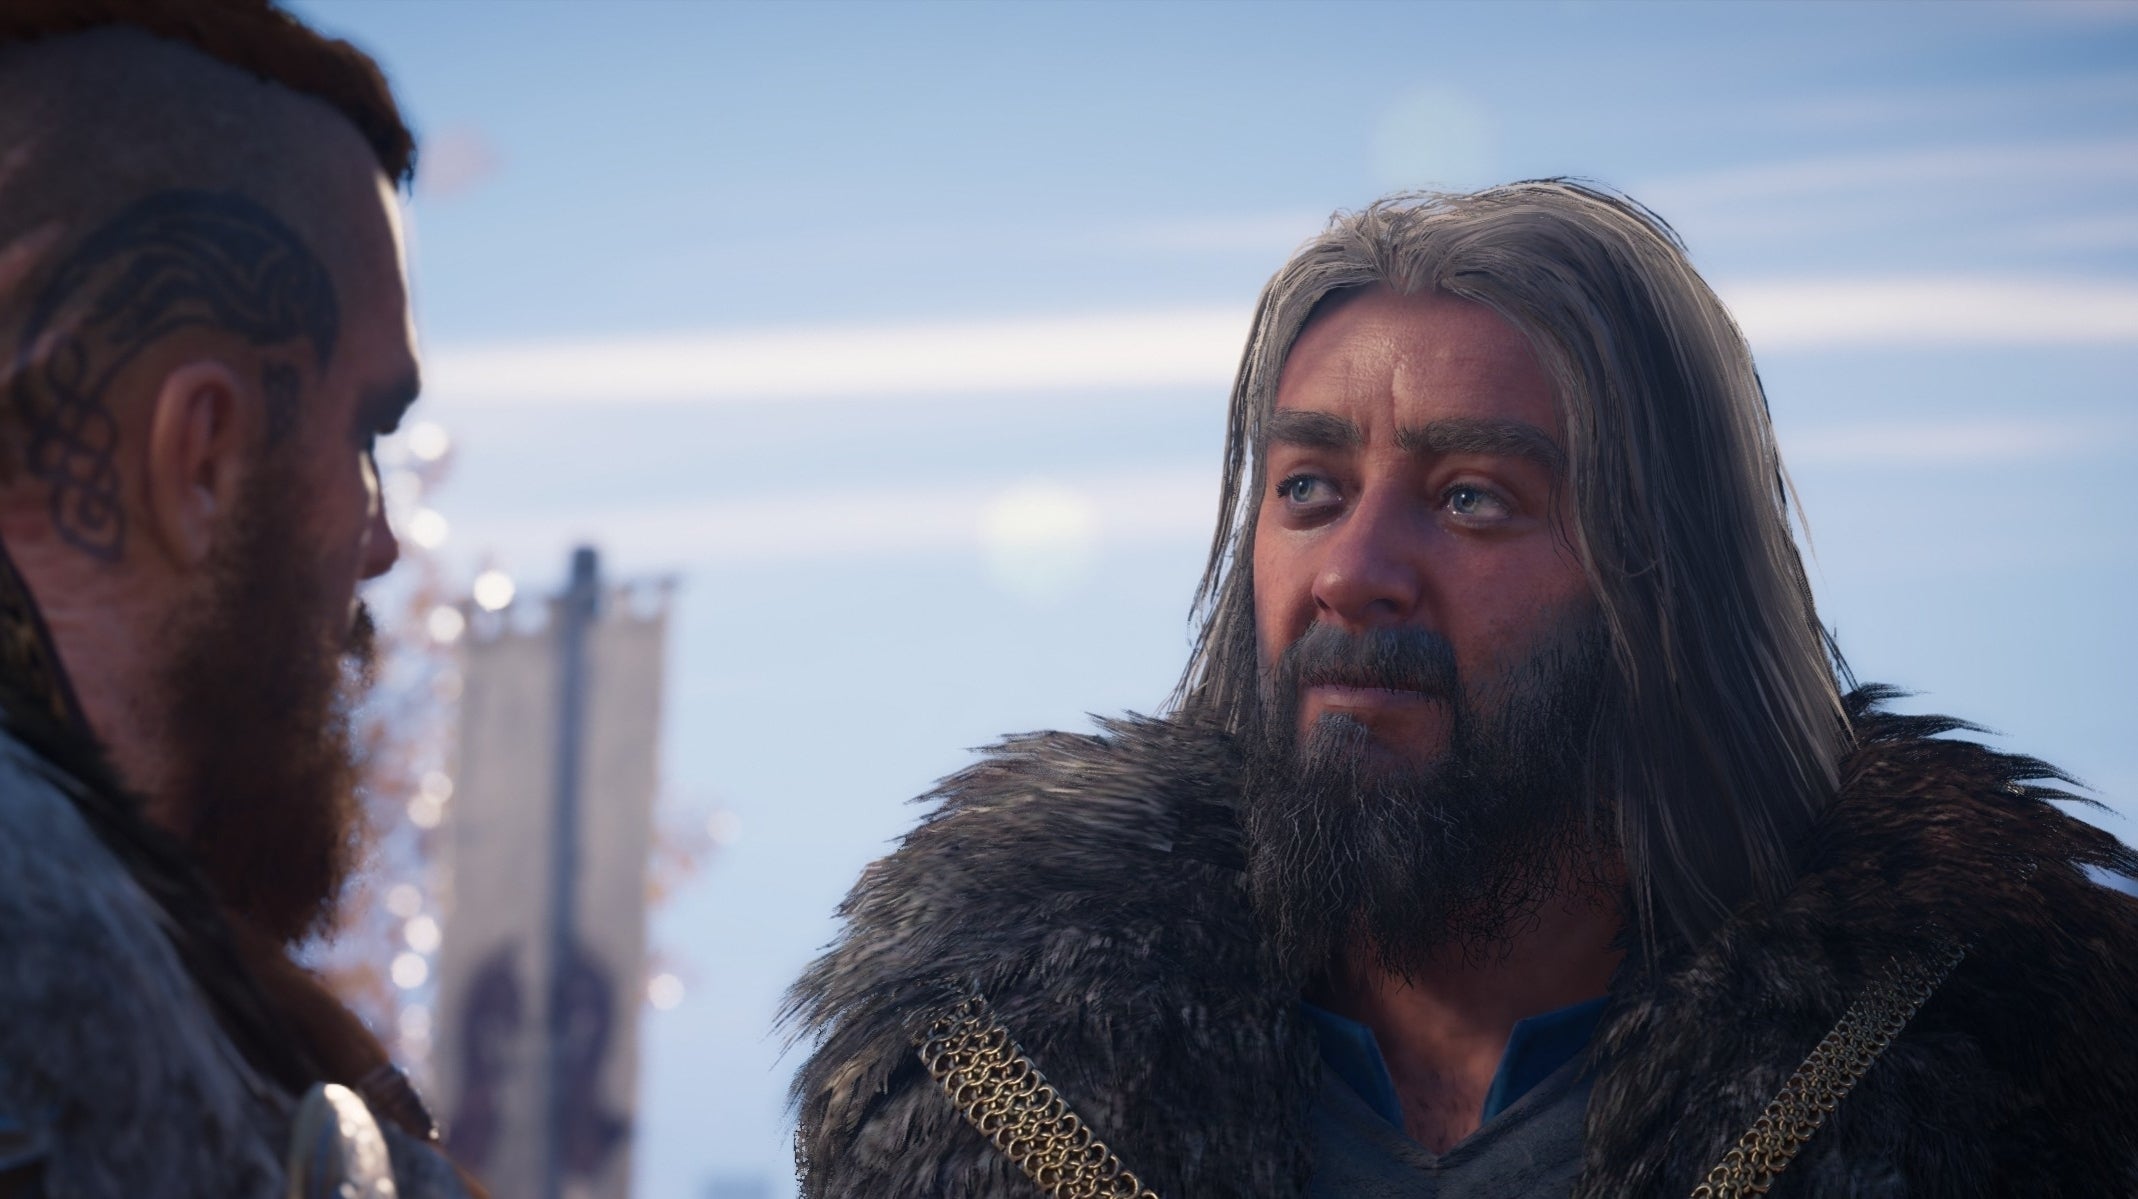 Image for Assassin's Creed Valhalla - Vili or Trygve: The consequences of choosing the next Jarl of Snotinghamscire explained